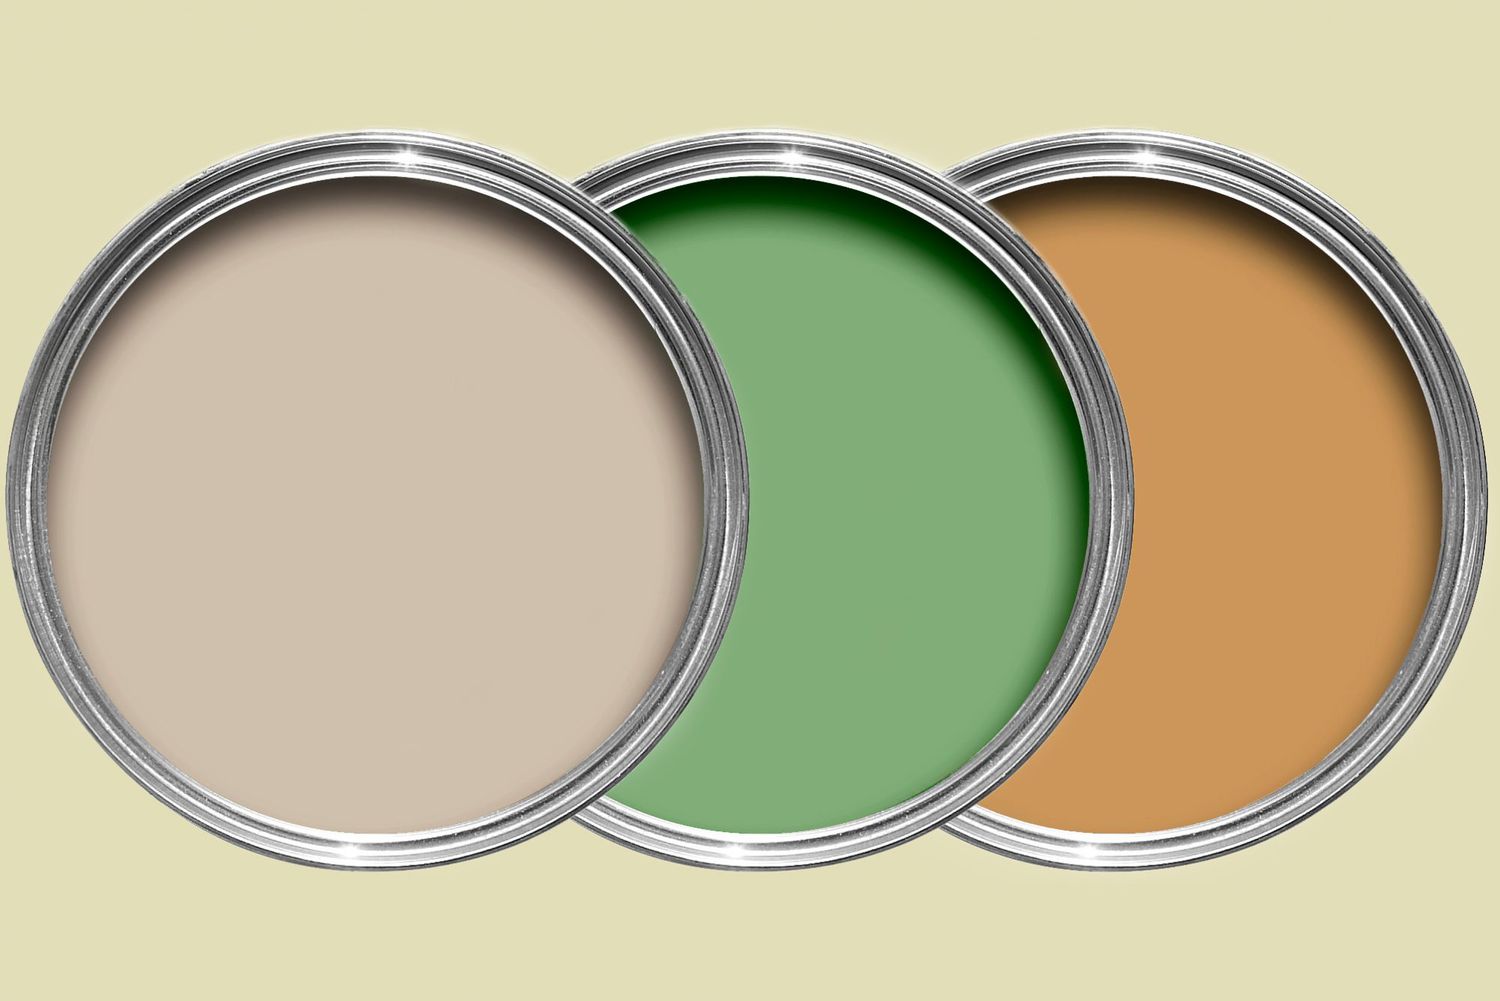 Farrow & Ball Paint paint swatches